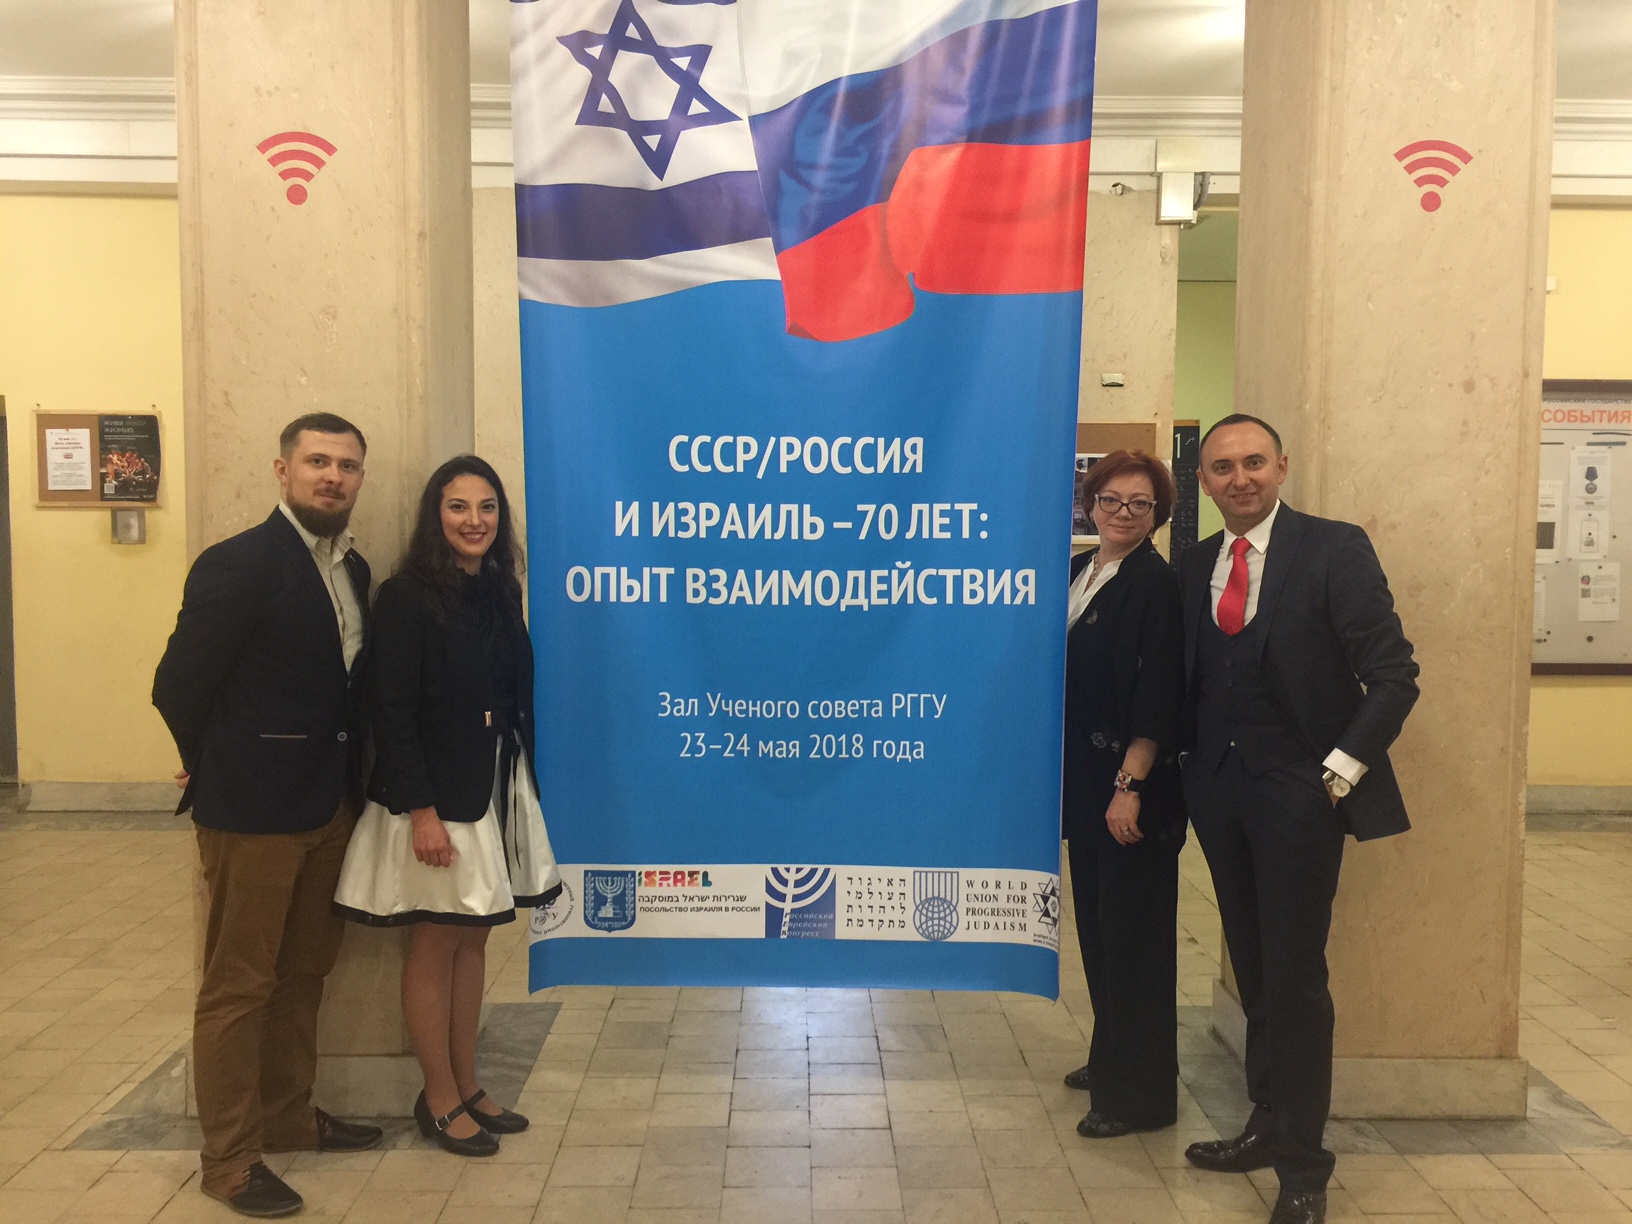 World Union Conference at Russian State University of Humanities in Moscow about Israel Russia relations and 70 years of Statehood